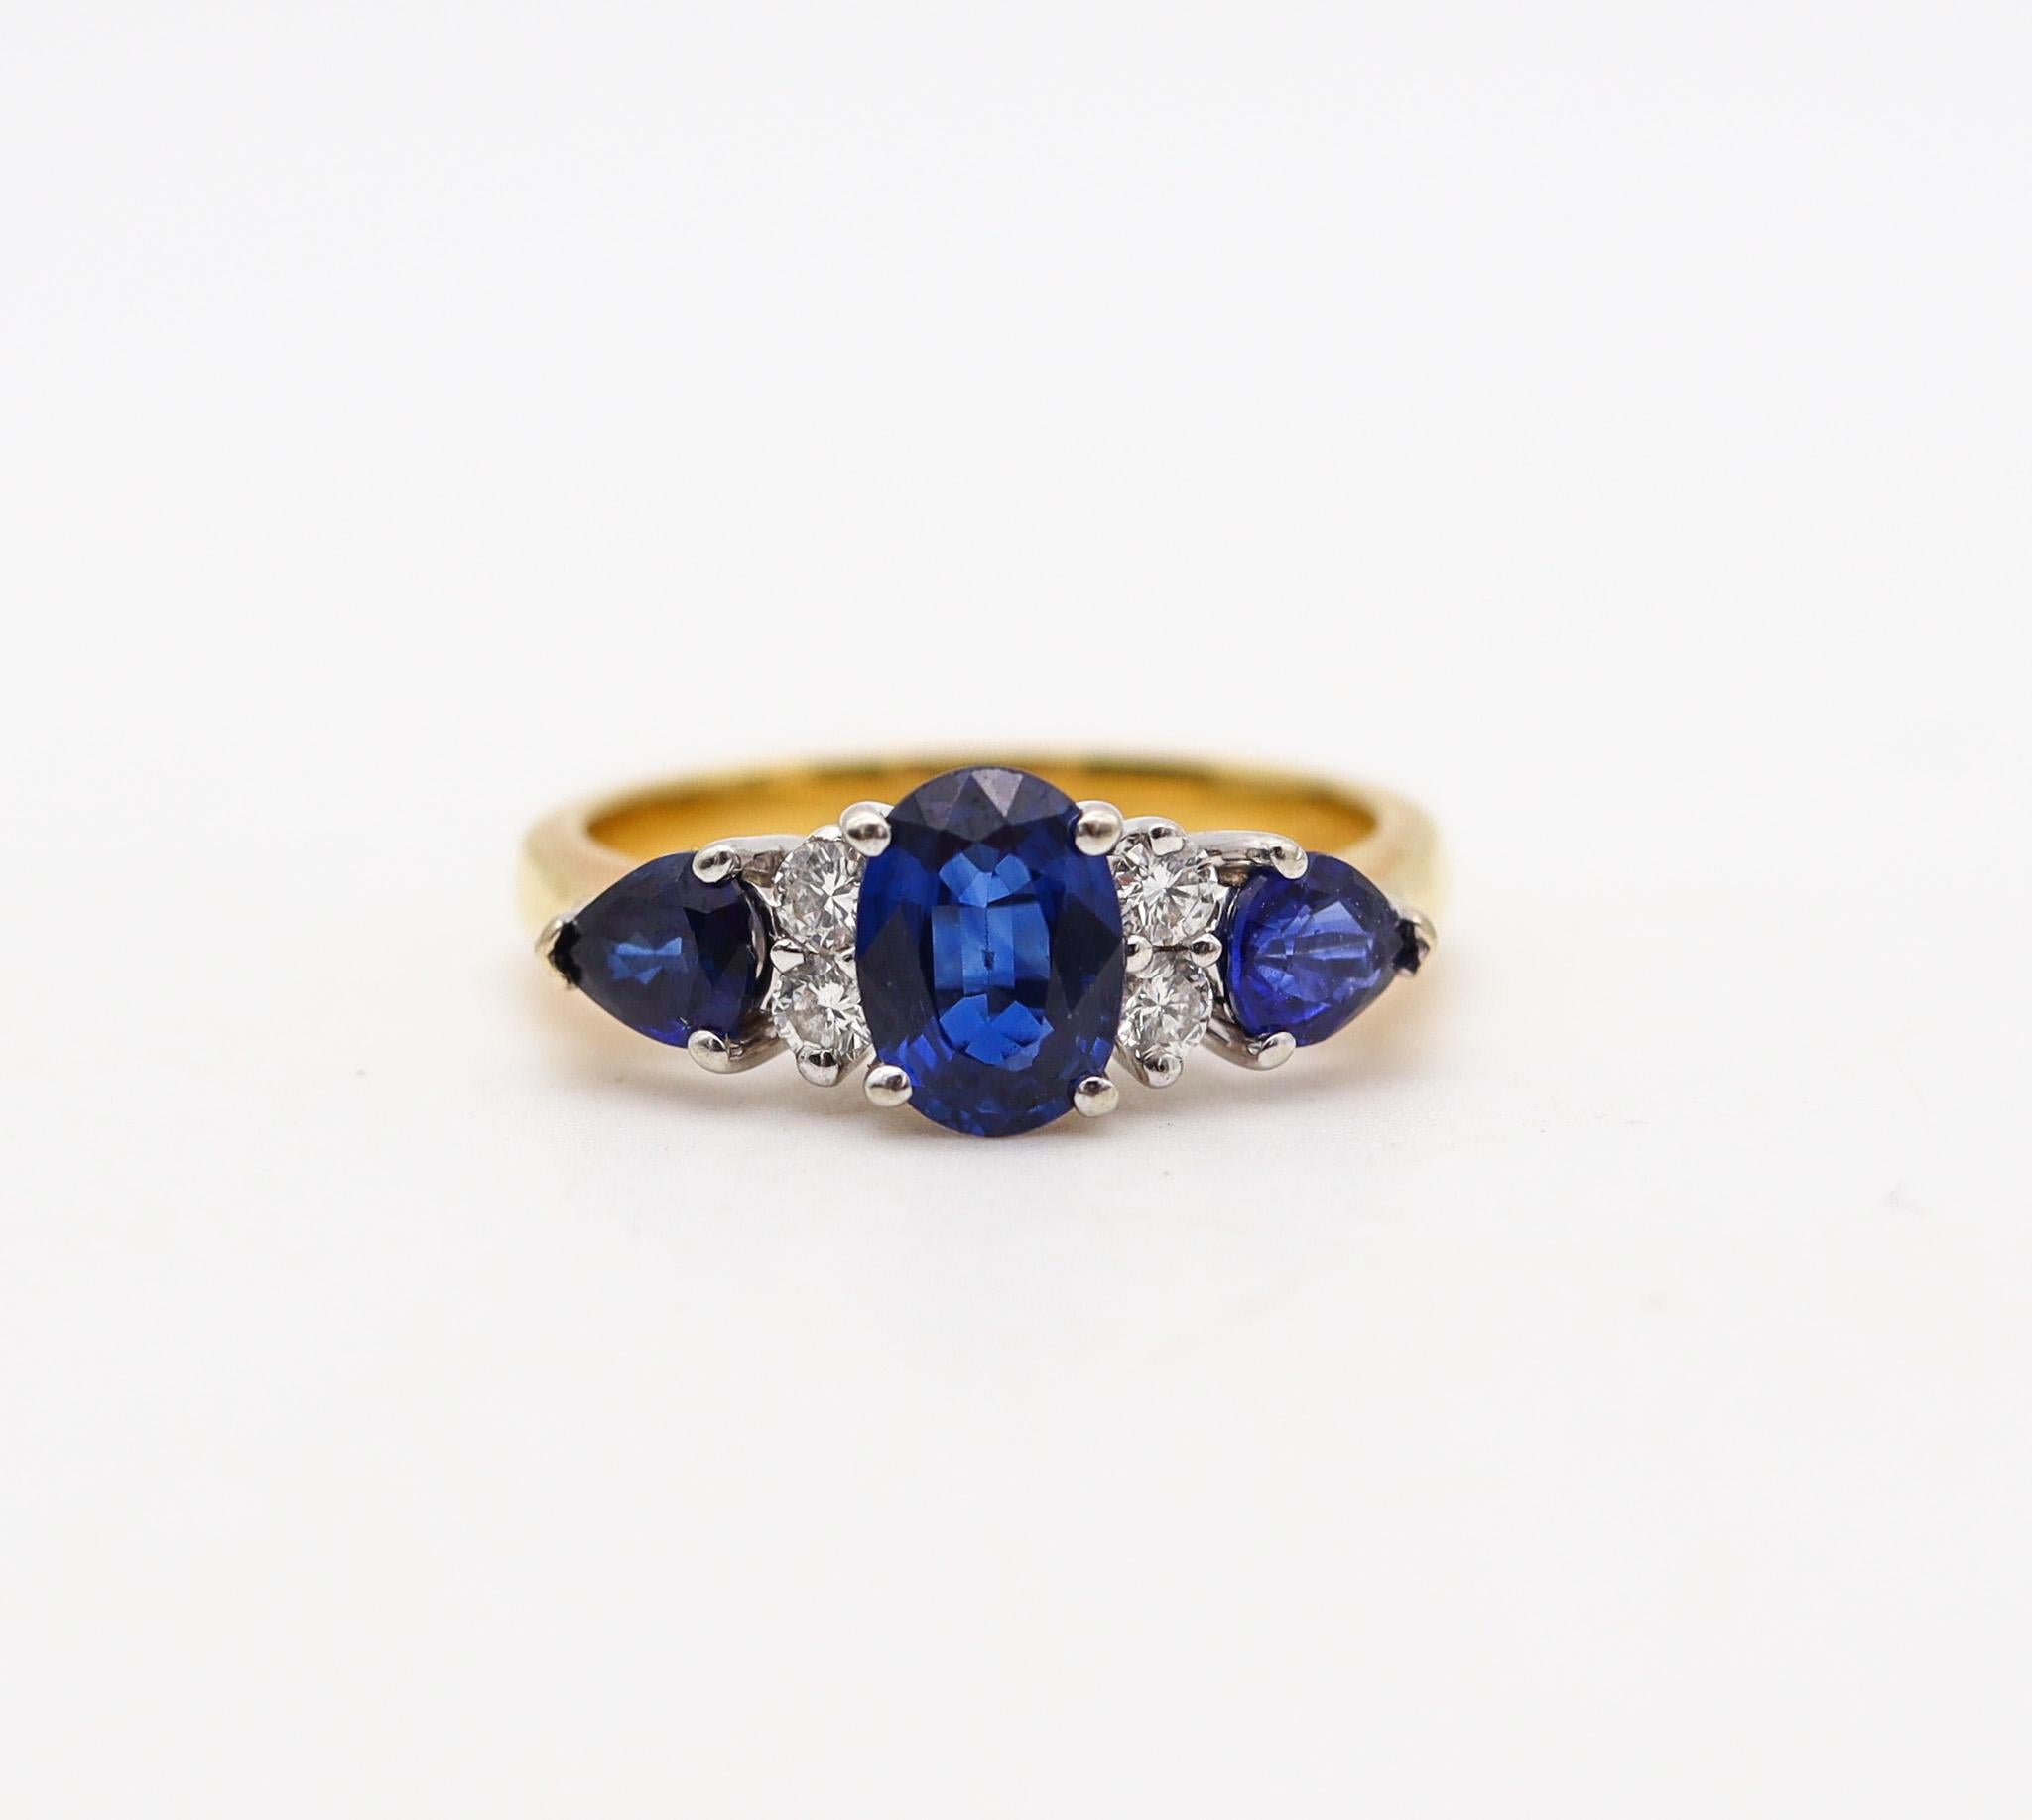 Three stone setting ring with sapphires designed by Spark Studio.

A beautiful ring, created in Virginia United states at the Spark Studio. This three gemstones setting ring has been crafted in solid yellow and white gold of 18 karats with high